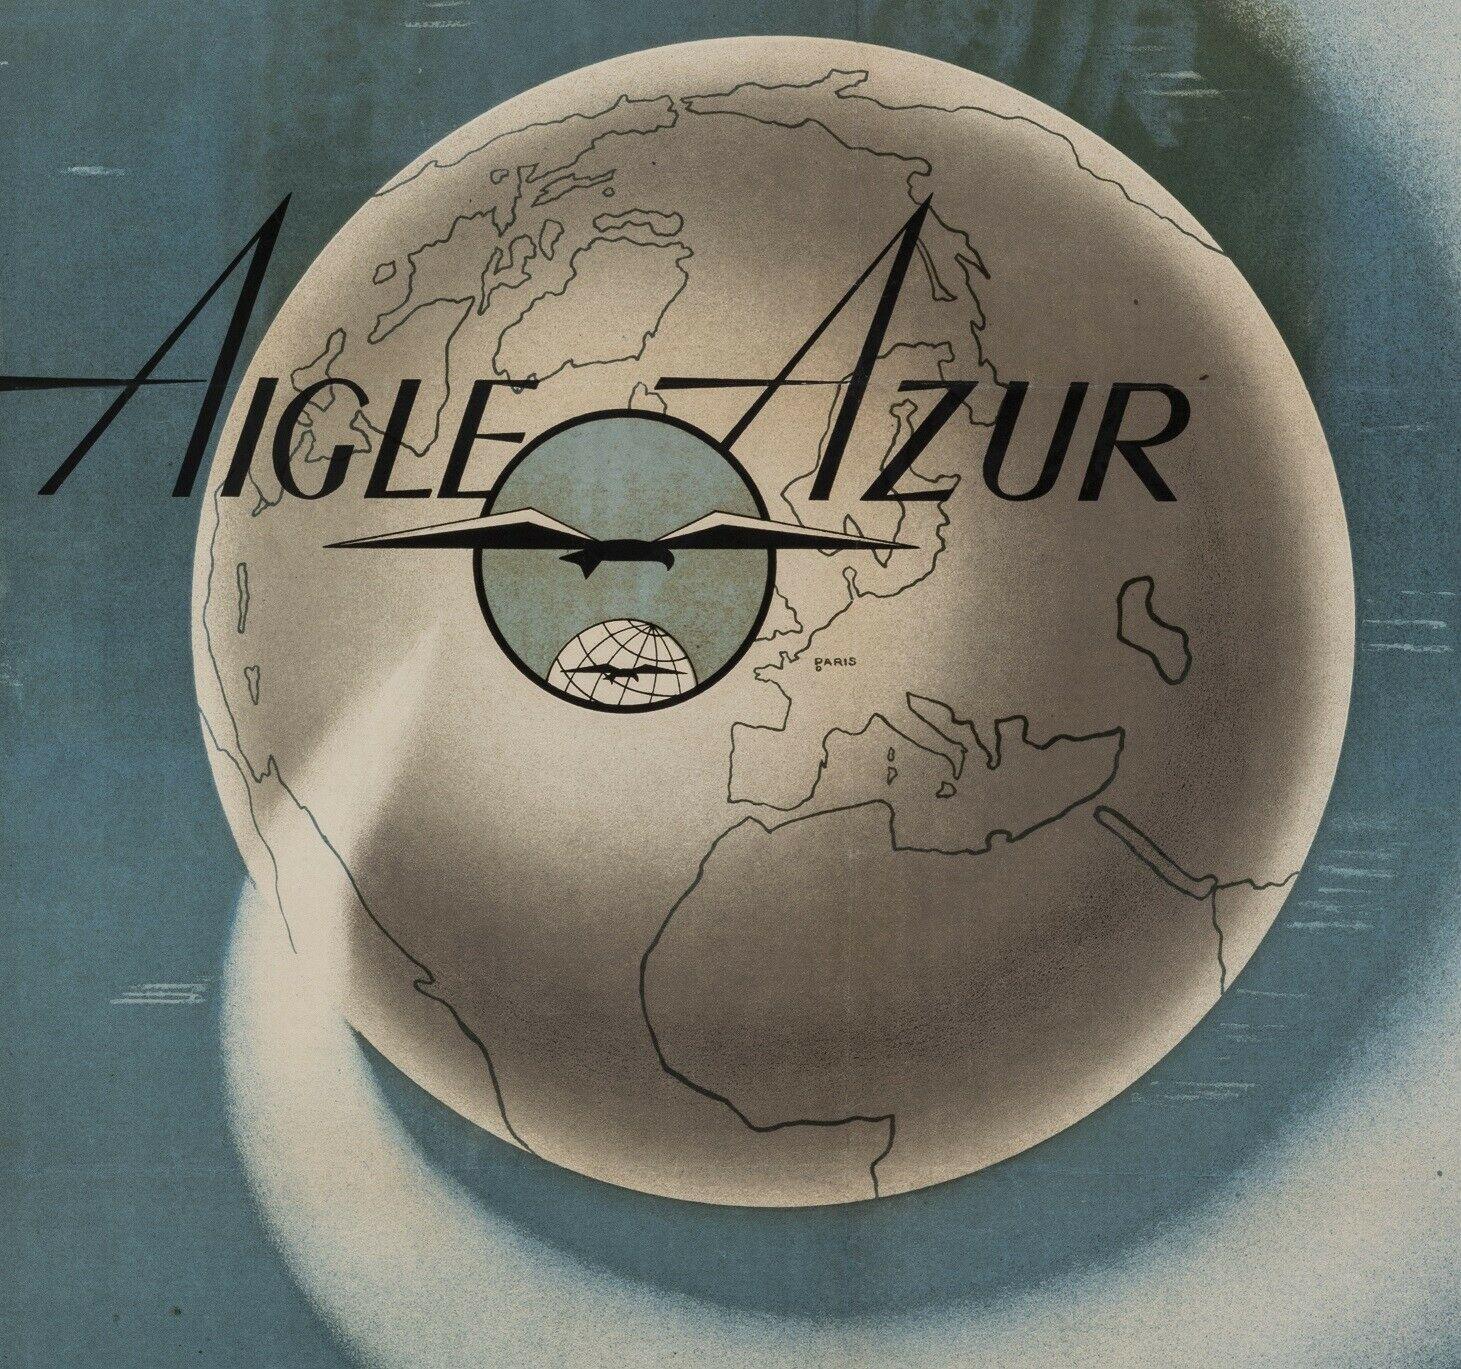 Vintage Airline Poster-Papa-Aigle Azur-France-North Africa Algeria, 1950

Additional Details:
Materials and Techniques: Colour lithograph on paper
Color: Blue, Grey
Region of Origin: Algeria
Framing: Unframed
Country/Region of Manufacture: